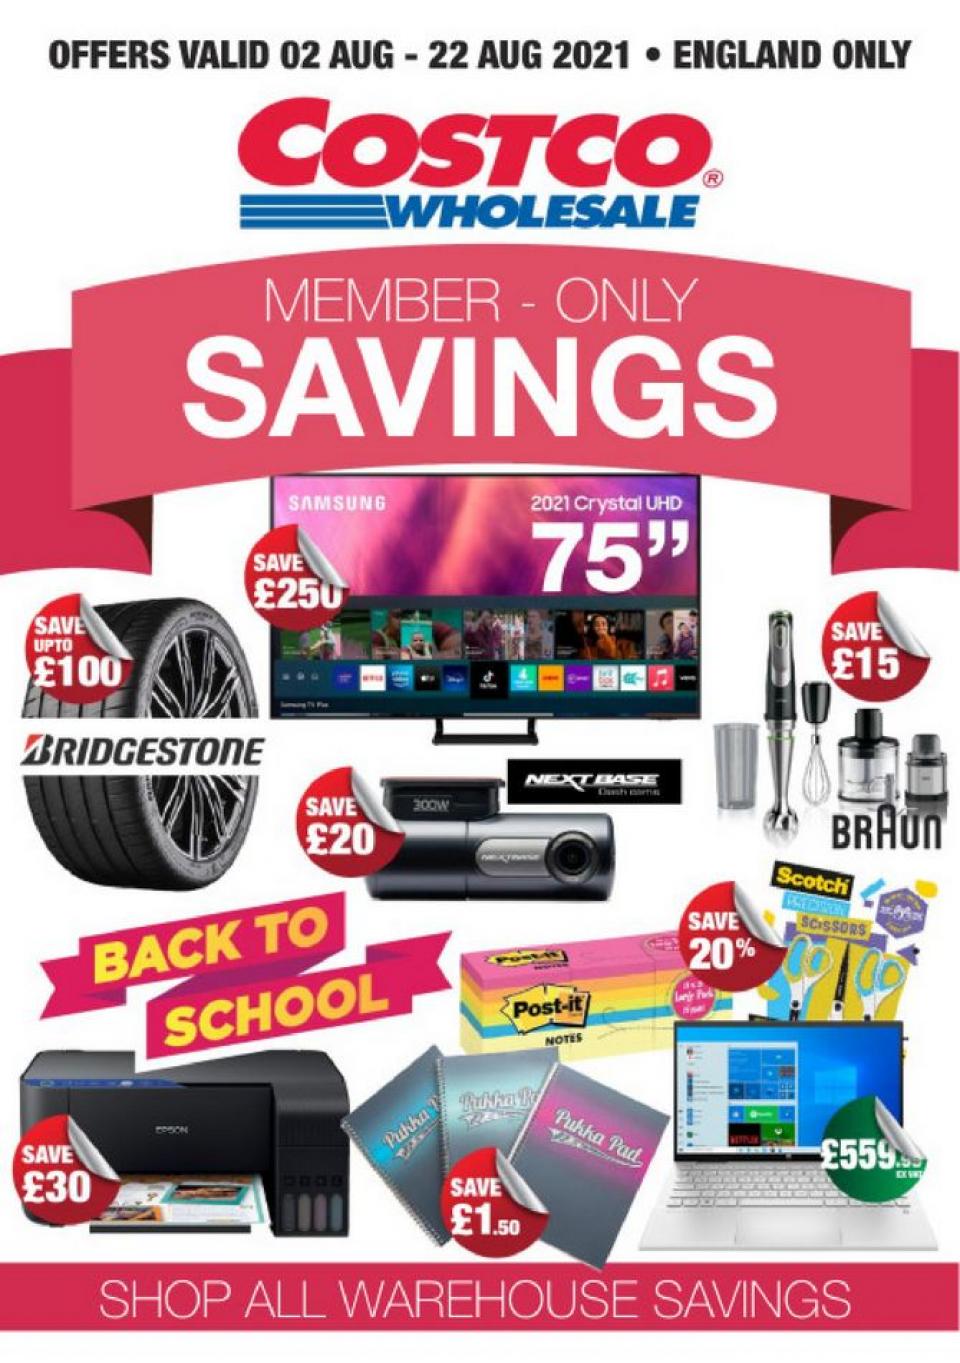 Costco Offers Member-Only Savings 2 – 22 August 2021